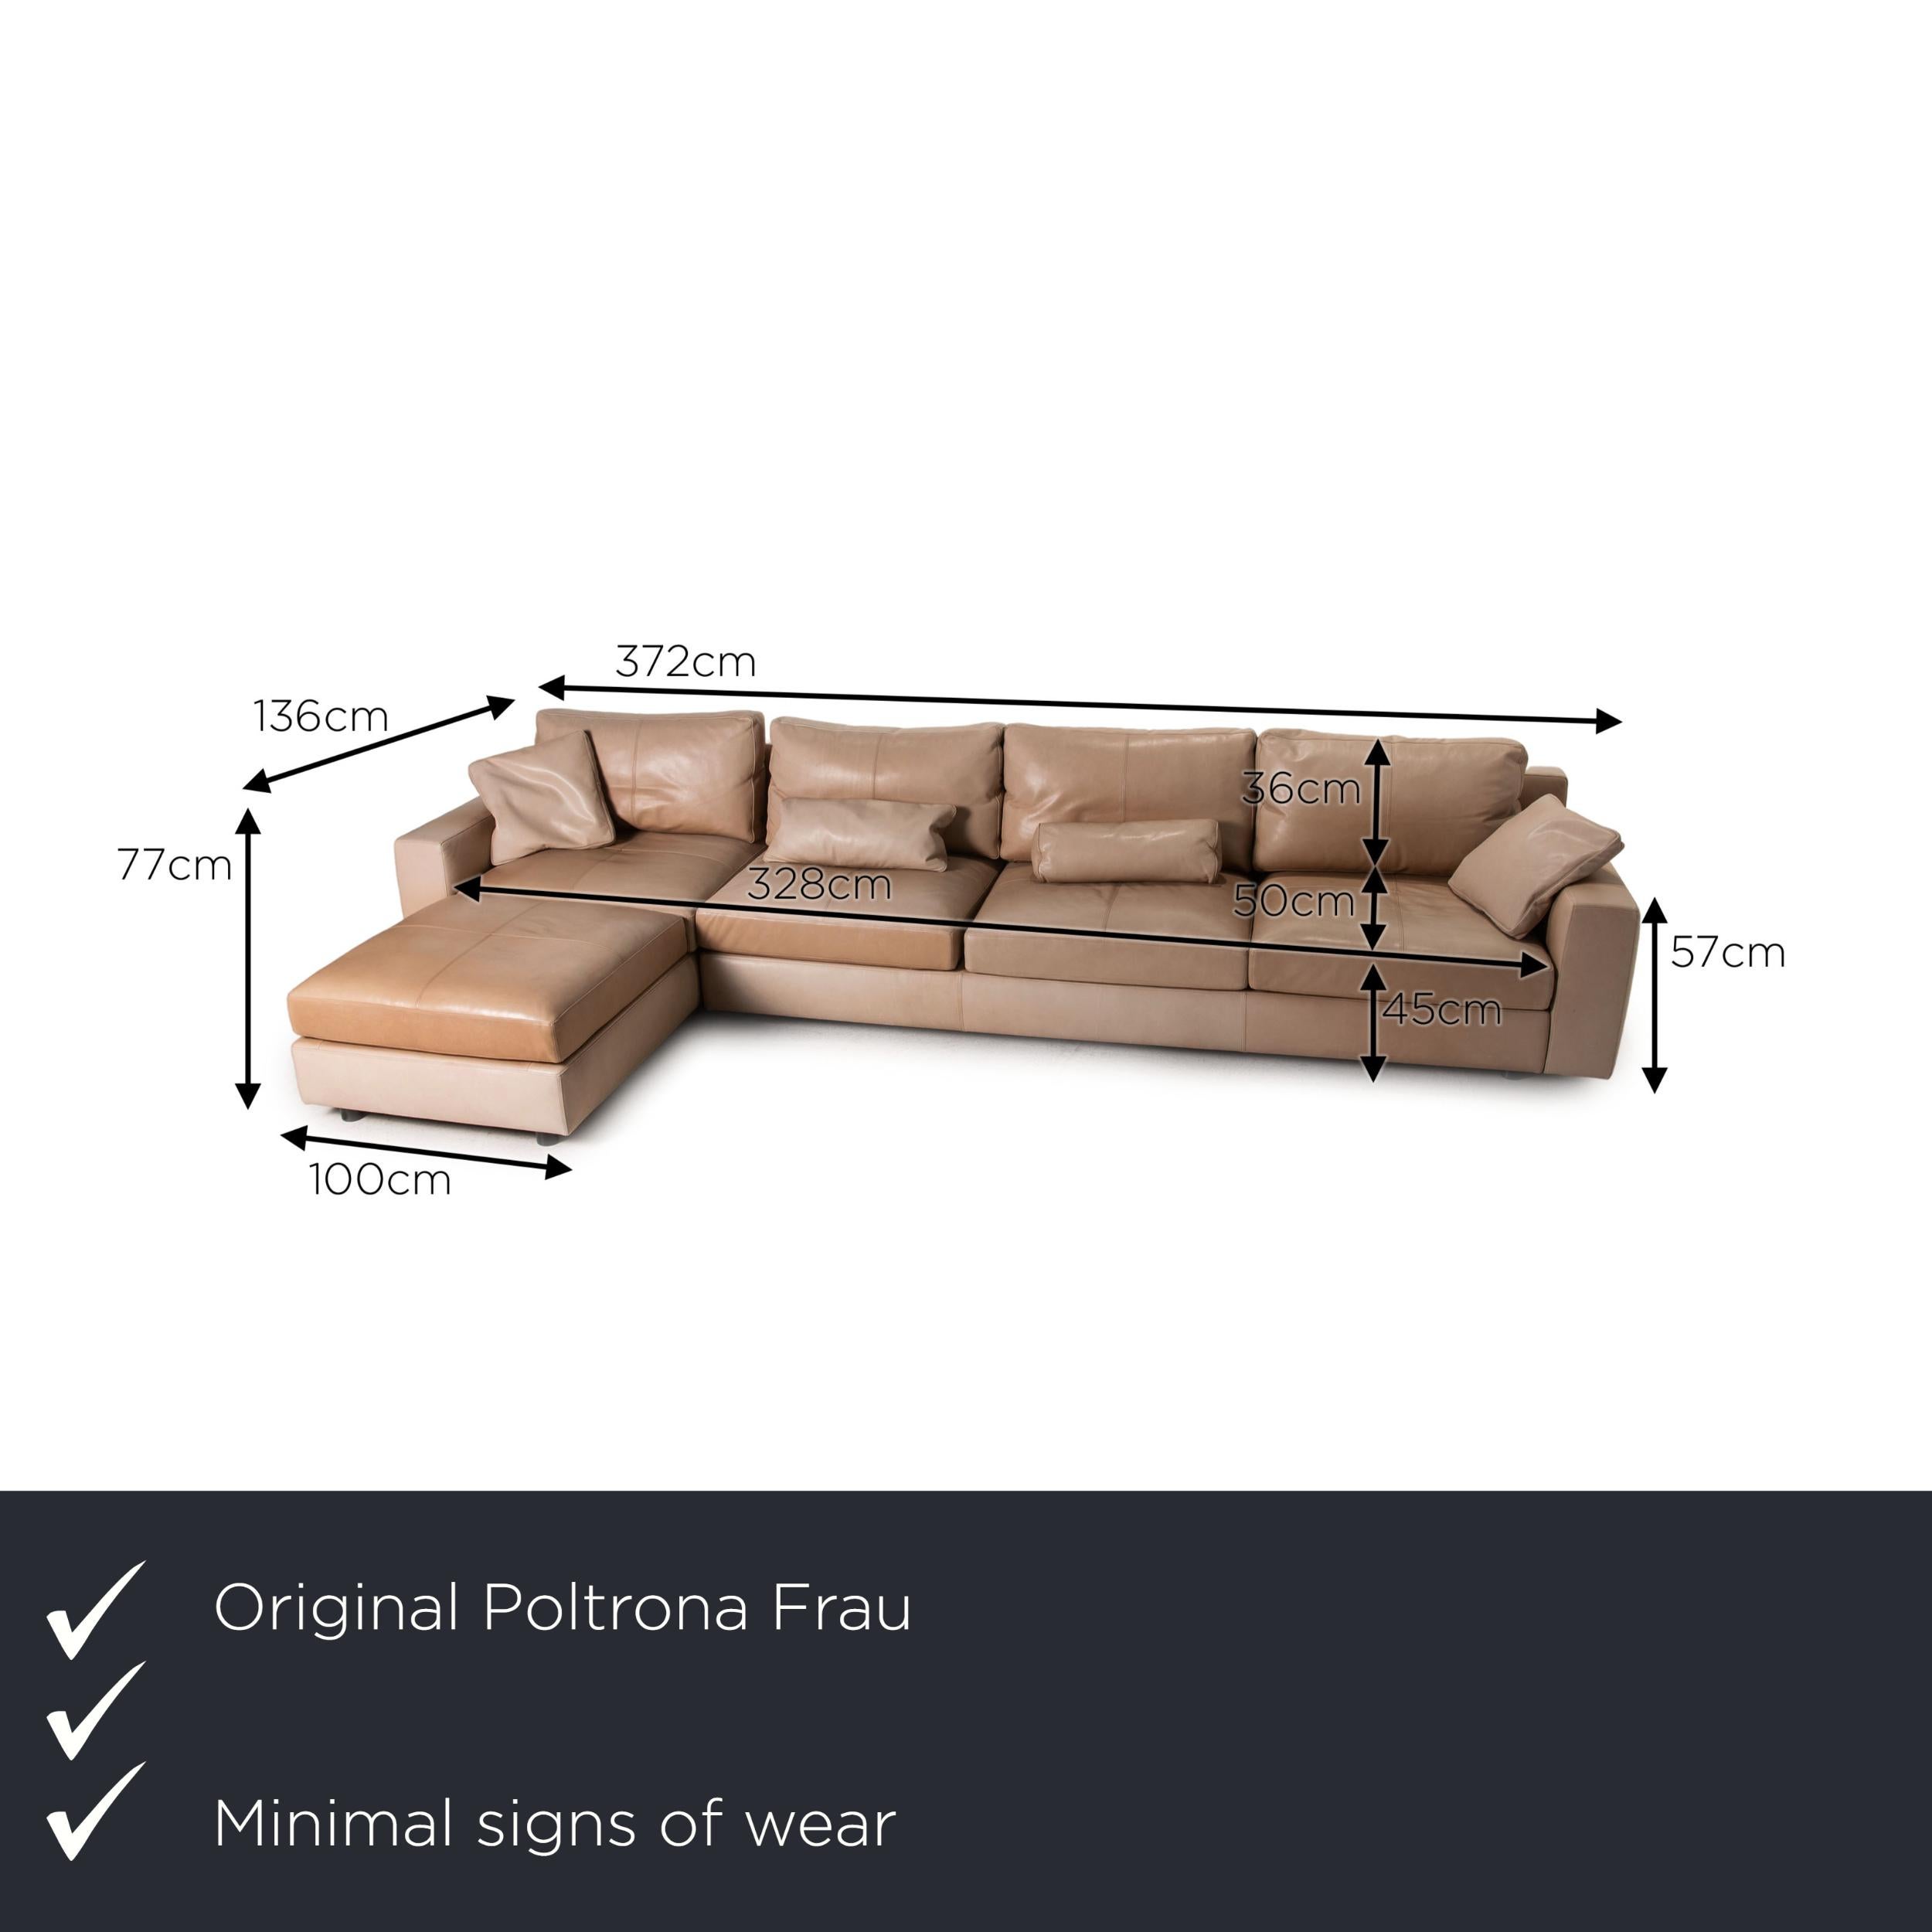 We present to you a Poltrona Frau Massimosistema leather sofa beige corner sofa couch.
 

 Product measurements in centimeters:
 

Depth: 100
Width: 136
Height: 77
Seat height: 45
Rest height: 57
Seat depth: 50
Seat width: 328
Back